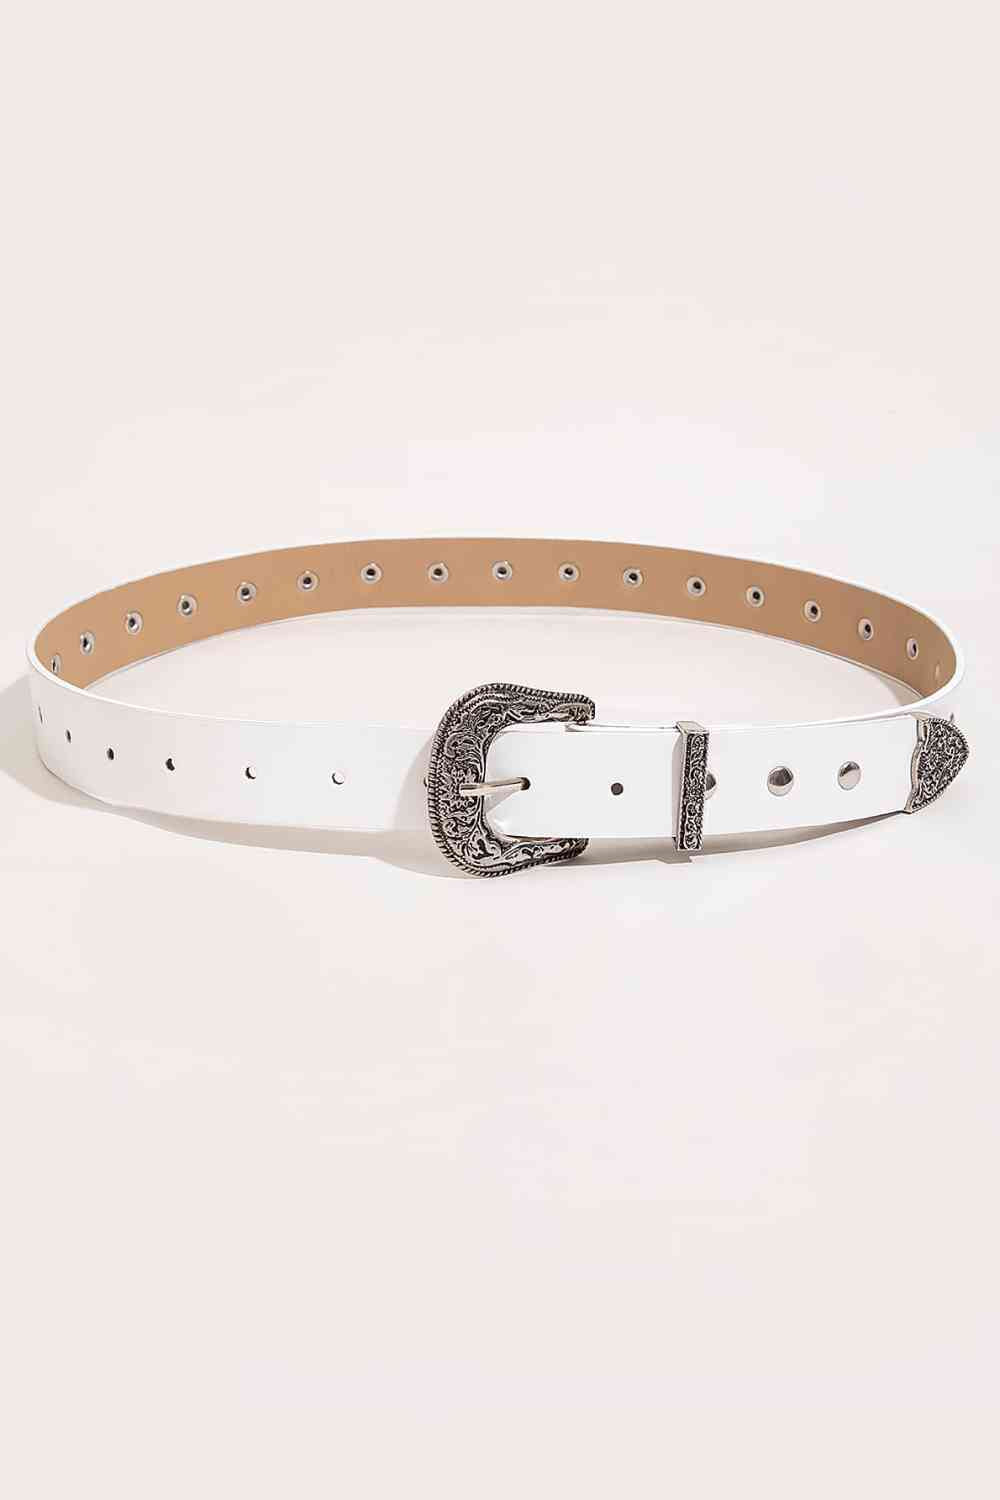 Beige PU Leather Studded Belt Sentient Beauty Fashions Apparel & Accessories